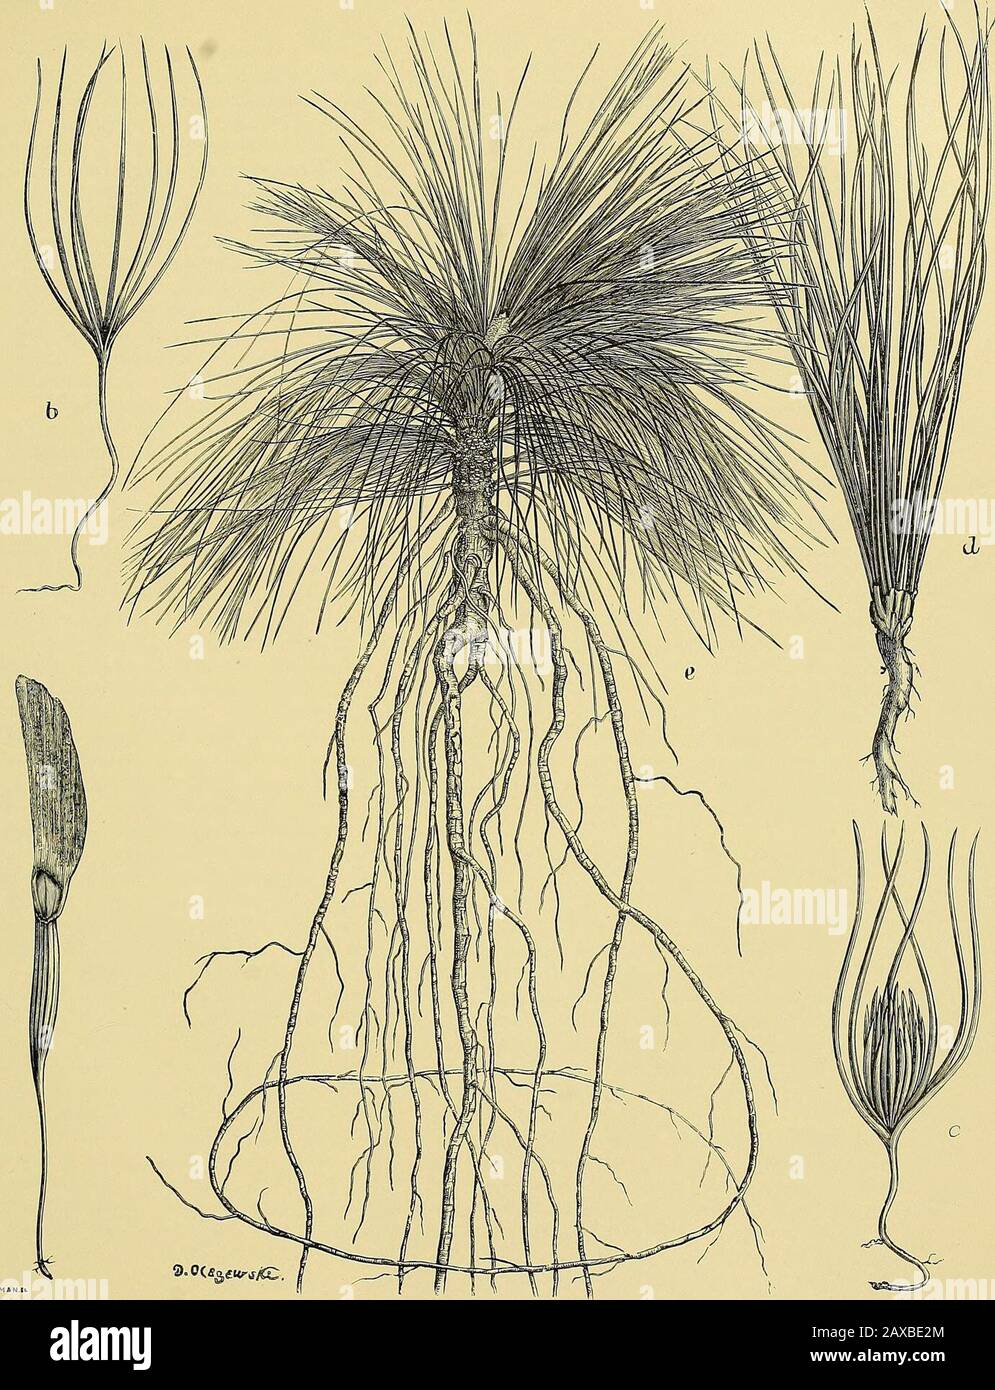 Report upon the forestry investigations of the U.SDepartment of agriculture1877-1898 . LoNGLEAF Pine iPinus palustrisj Typical Tree.. PINUS PALUSTRIS: SEEDLINGS AND YOUNQ PLANT. , germiaating seed; fc, young seedling just unfolded; c, seedling unfolding primary leaves; d, foliage leaves at end of season; e, young tree, 3 to 4 years old- one-third natural size. GROWTH AND DEVELOPMENT. 75 of tbeir age. As far as coakl be observed the growth proceeds equally slowly during the fifth andsixth years, the plant at the end of that period being from 5 to 7 or 7J inches in length. Stage of rapid groirth Stock Photo